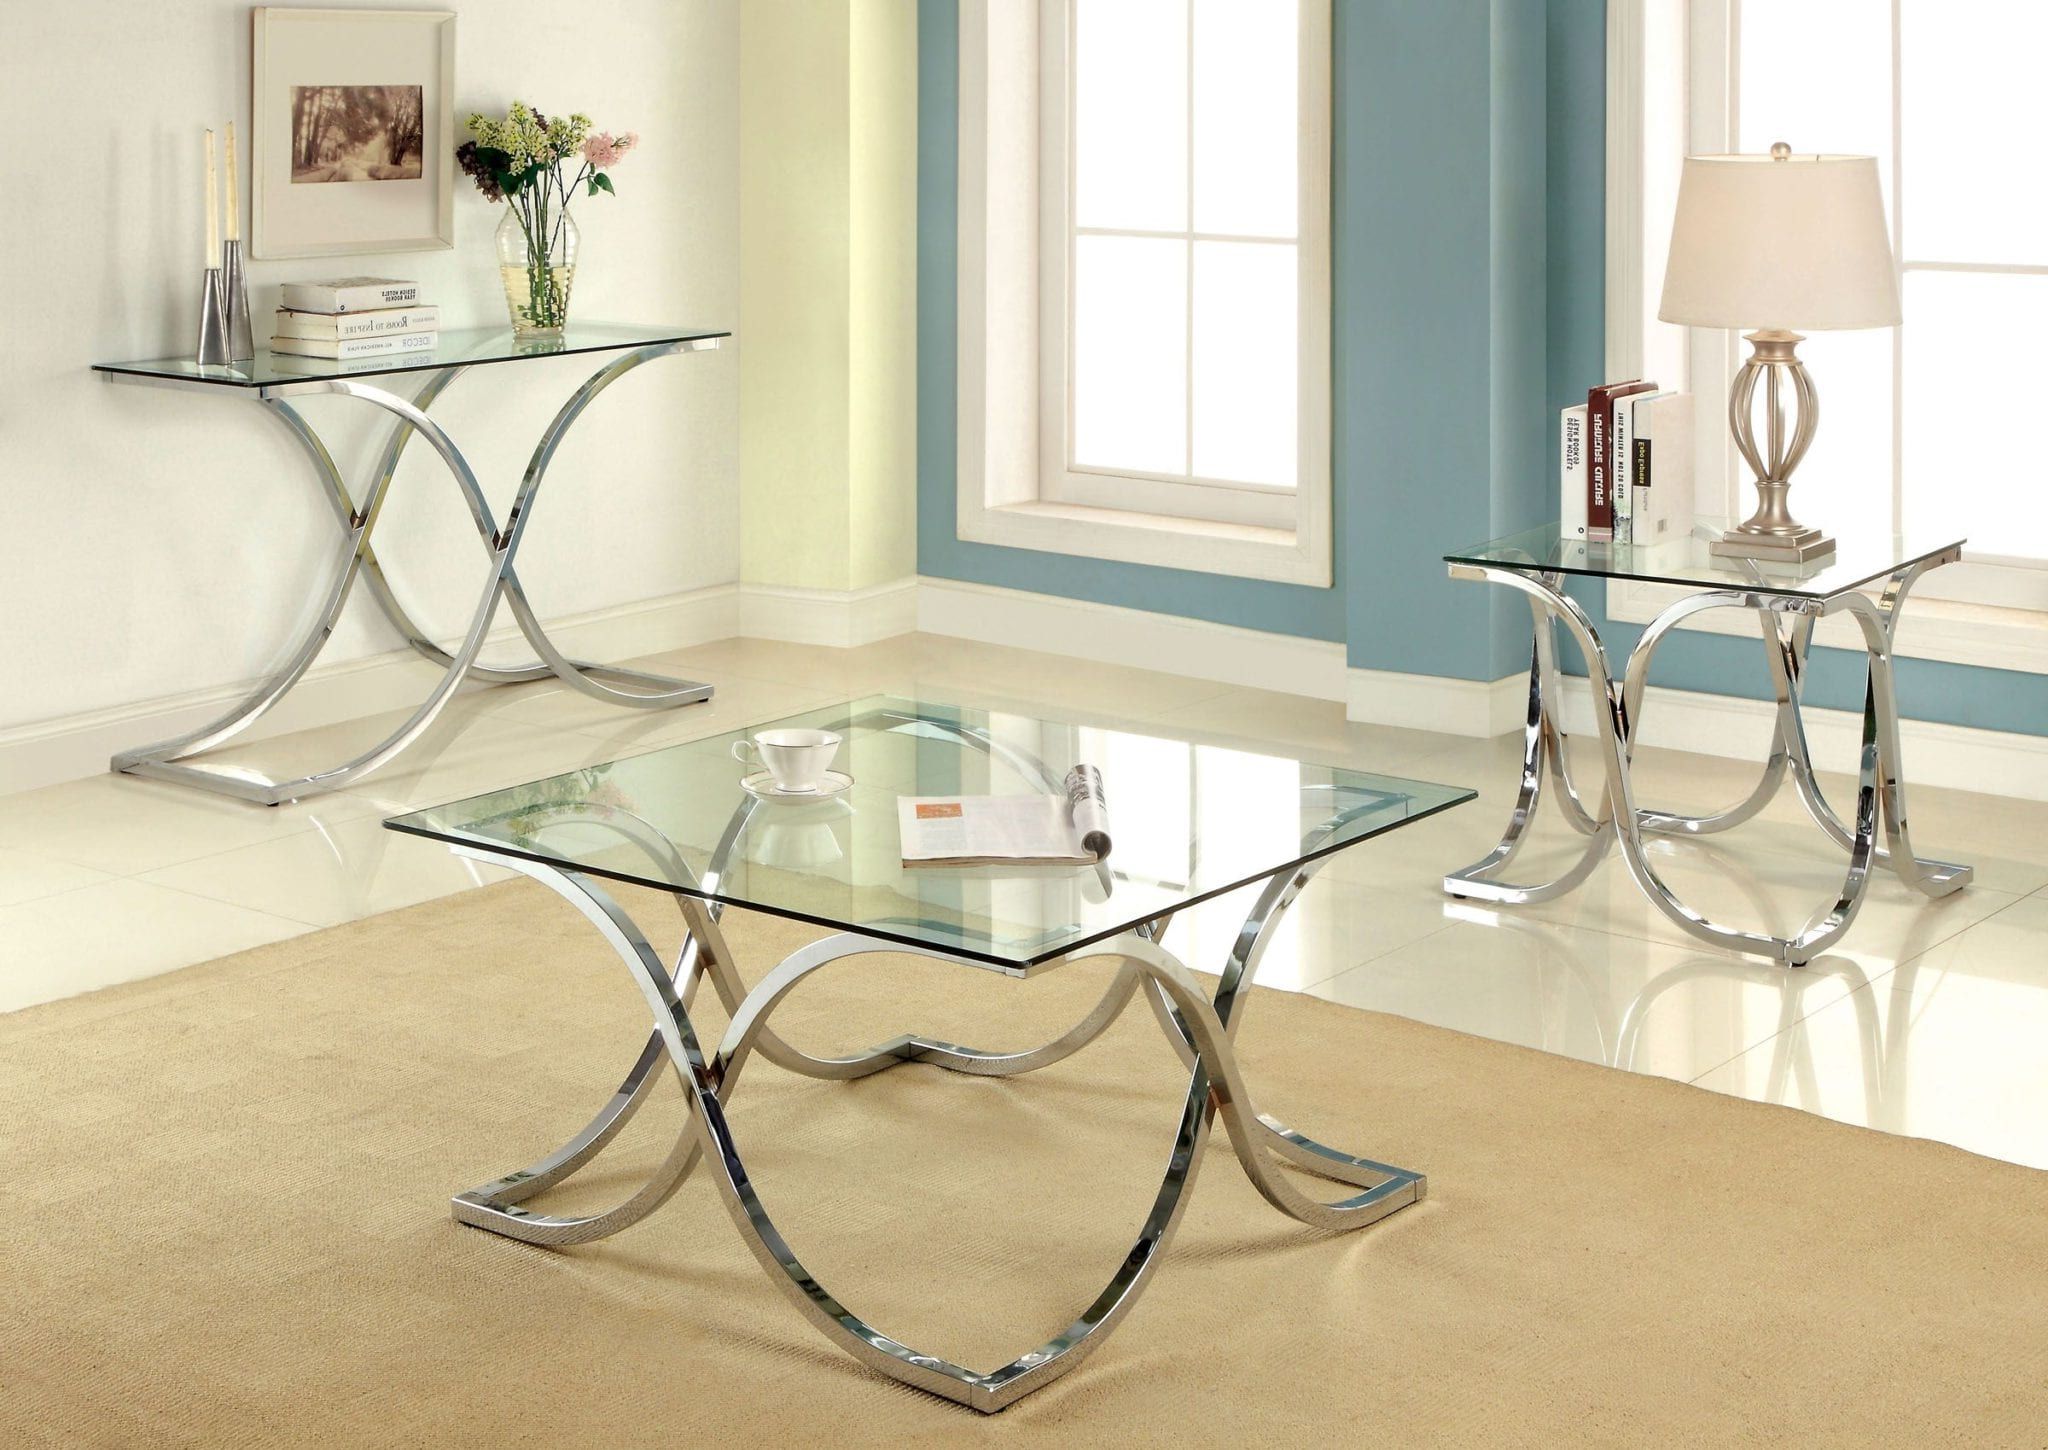 Widely Used Mirrored And Chrome Modern Cocktail Tables Throughout Cm4233 3 Pieces Contemporary Chrome Mirror Top Coffee (Gallery 9 of 20)